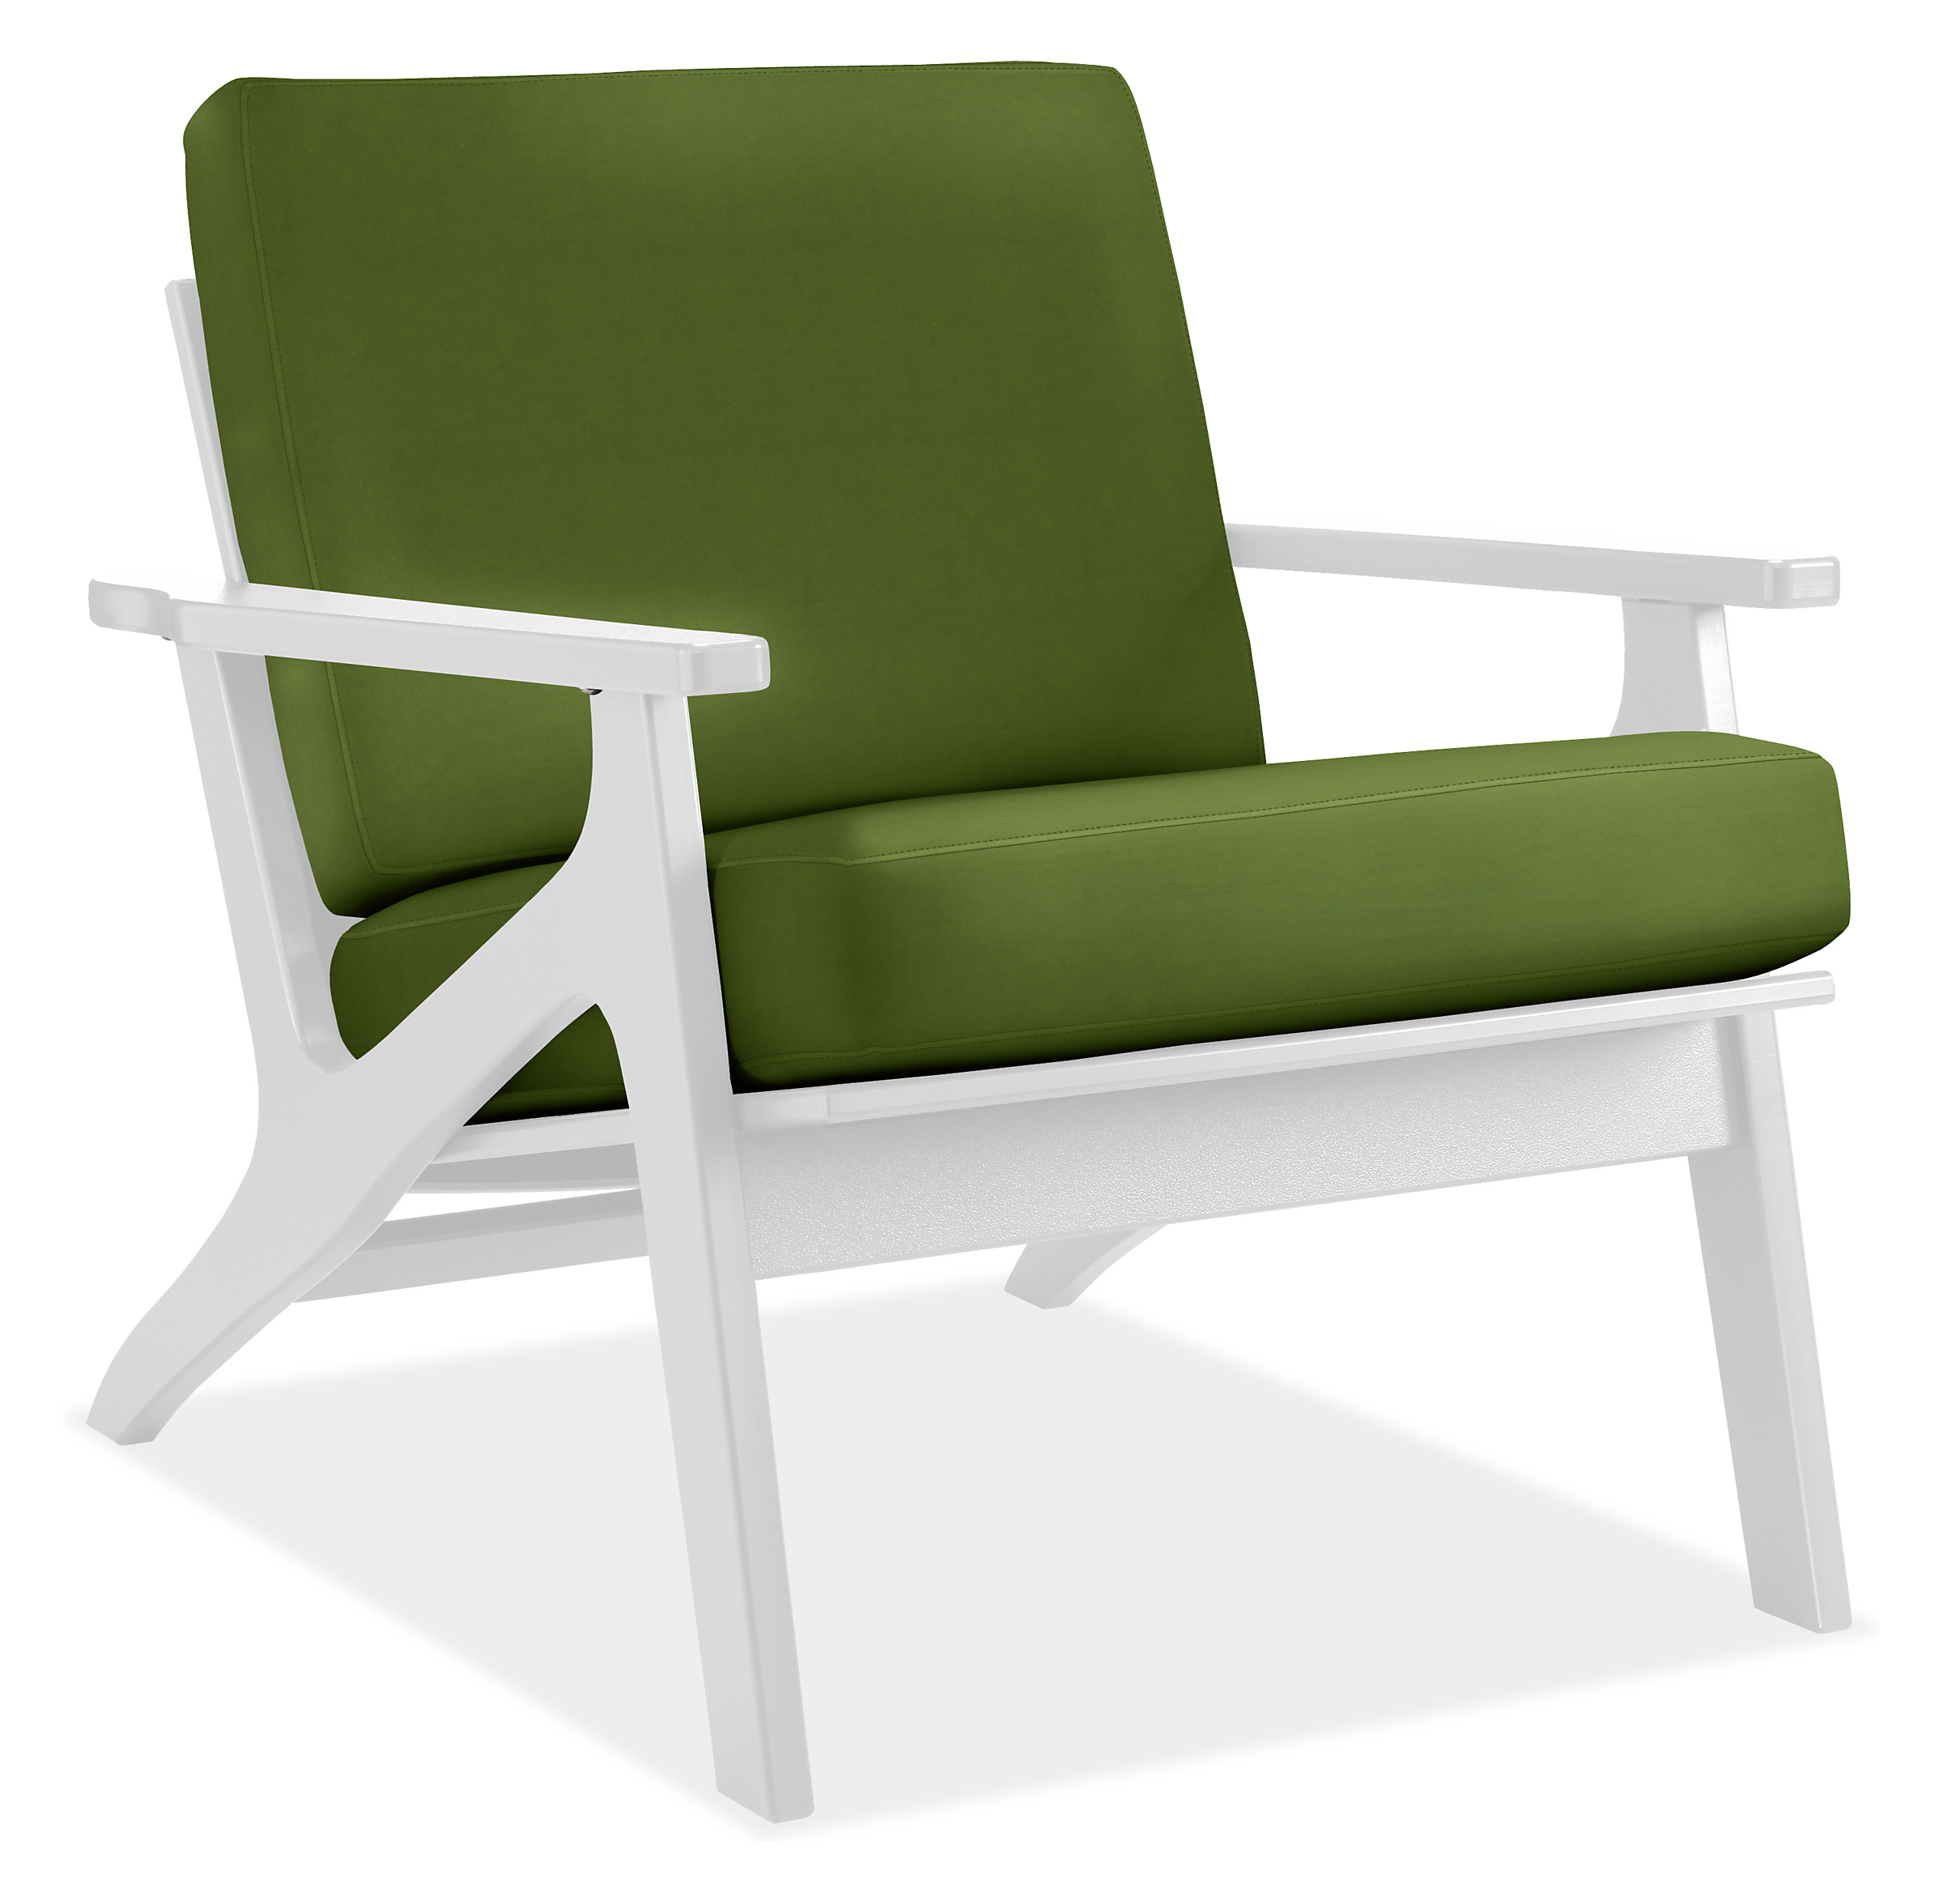 Breeze Chair in Tristan Green with White HDPE Frame